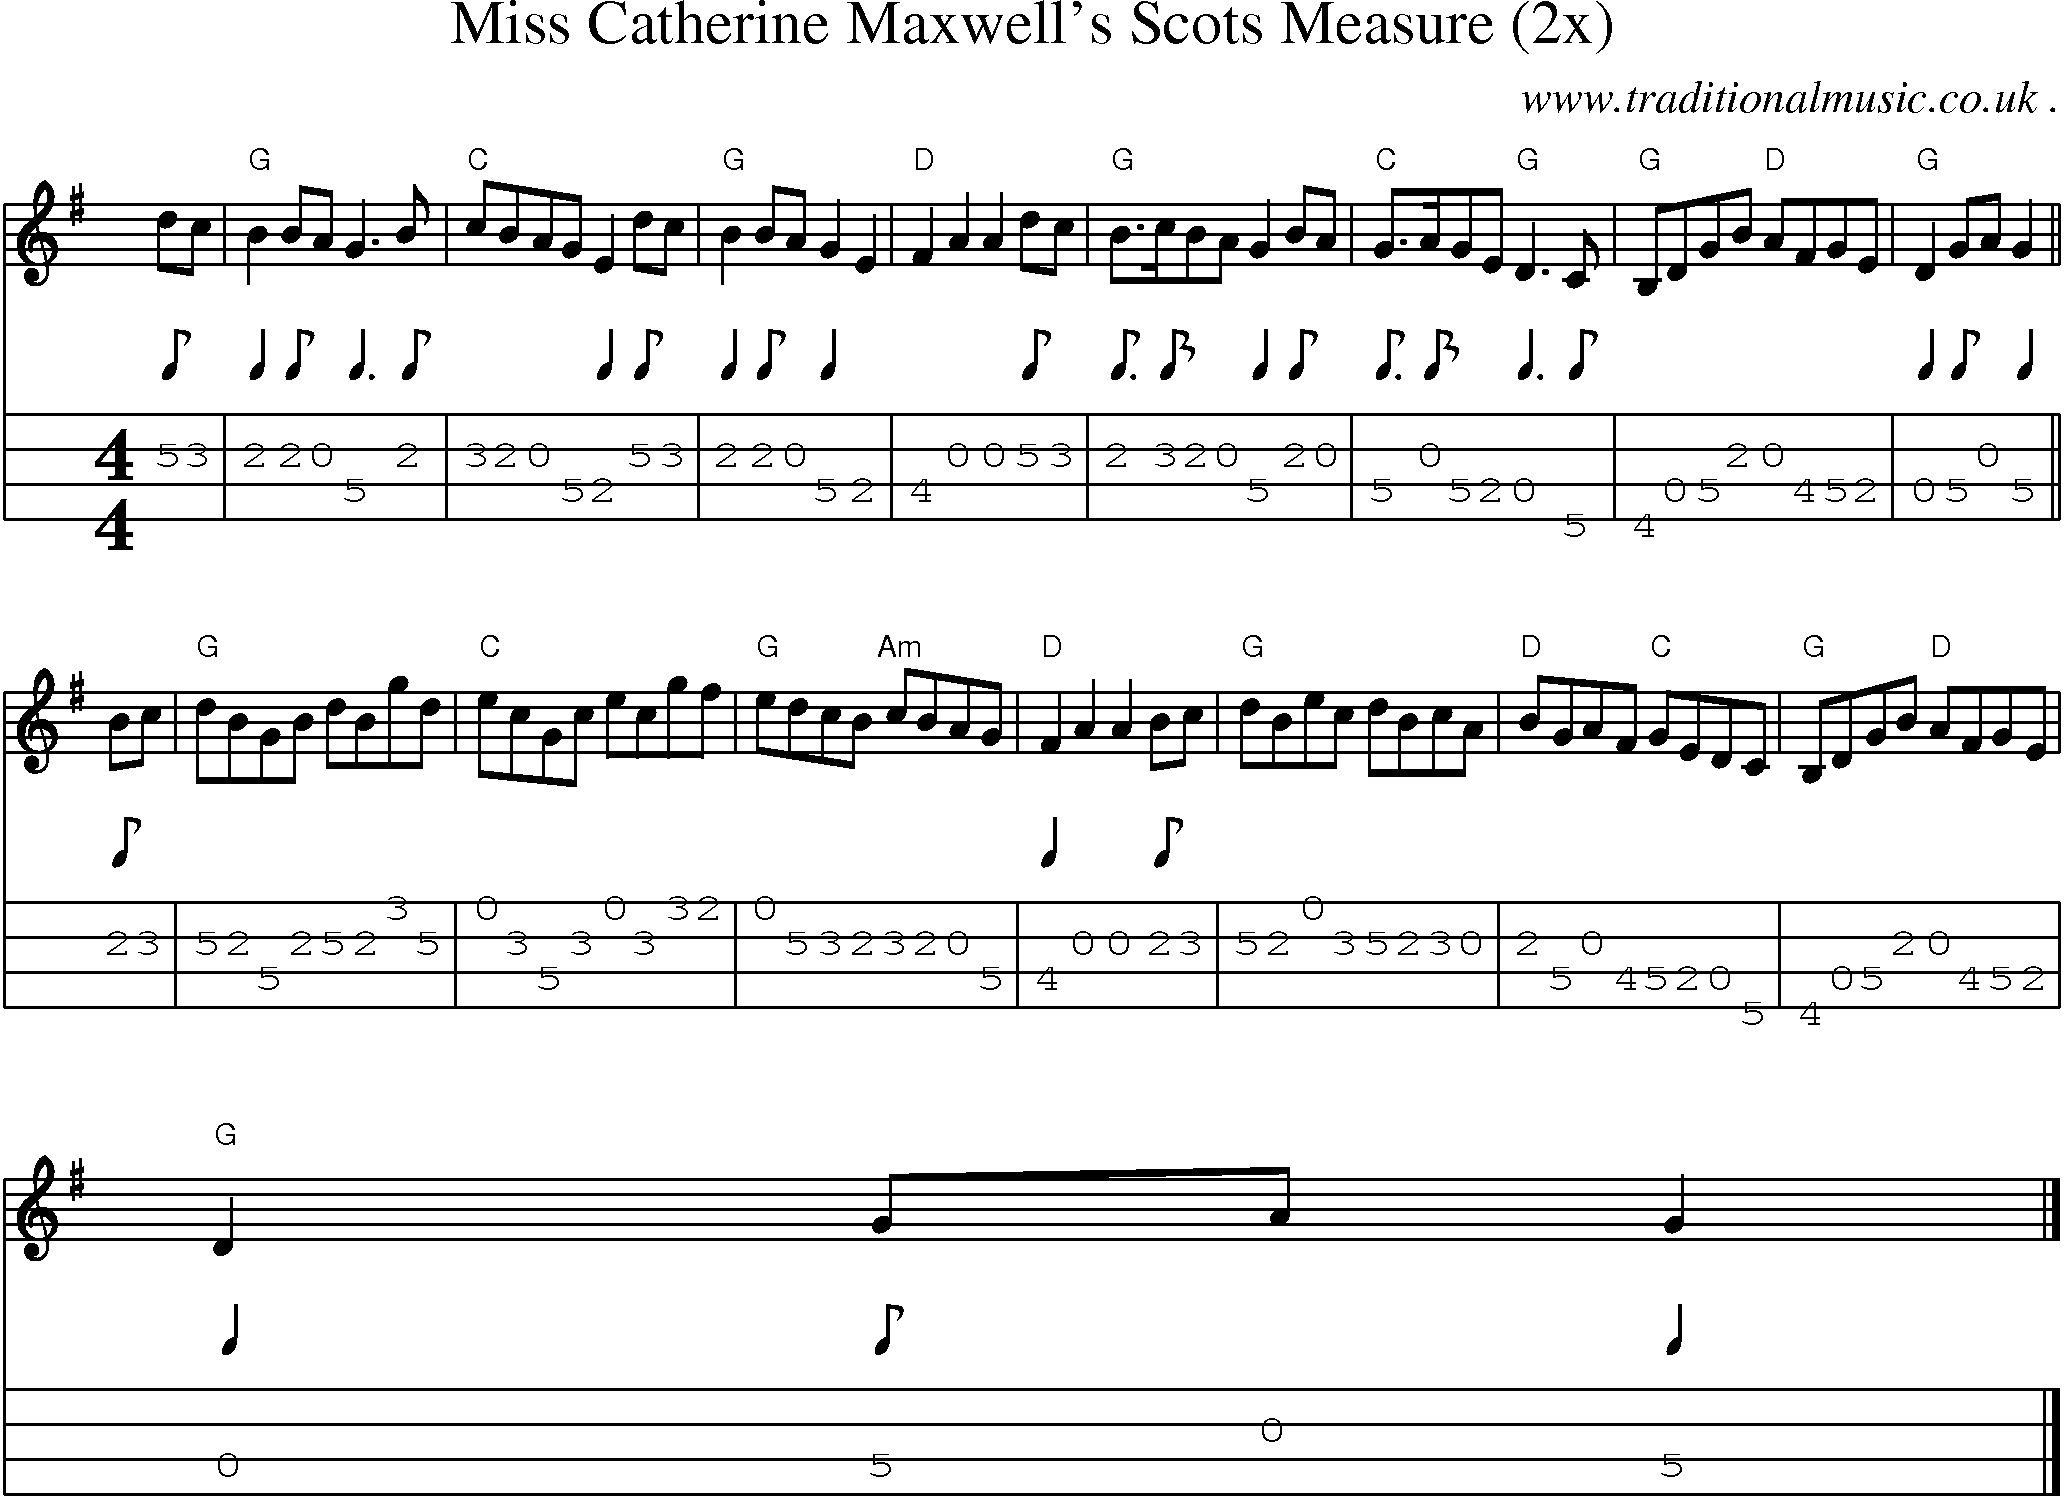 Sheet-music  score, Chords and Mandolin Tabs for Miss Catherine Maxwells Scots Measure 2x